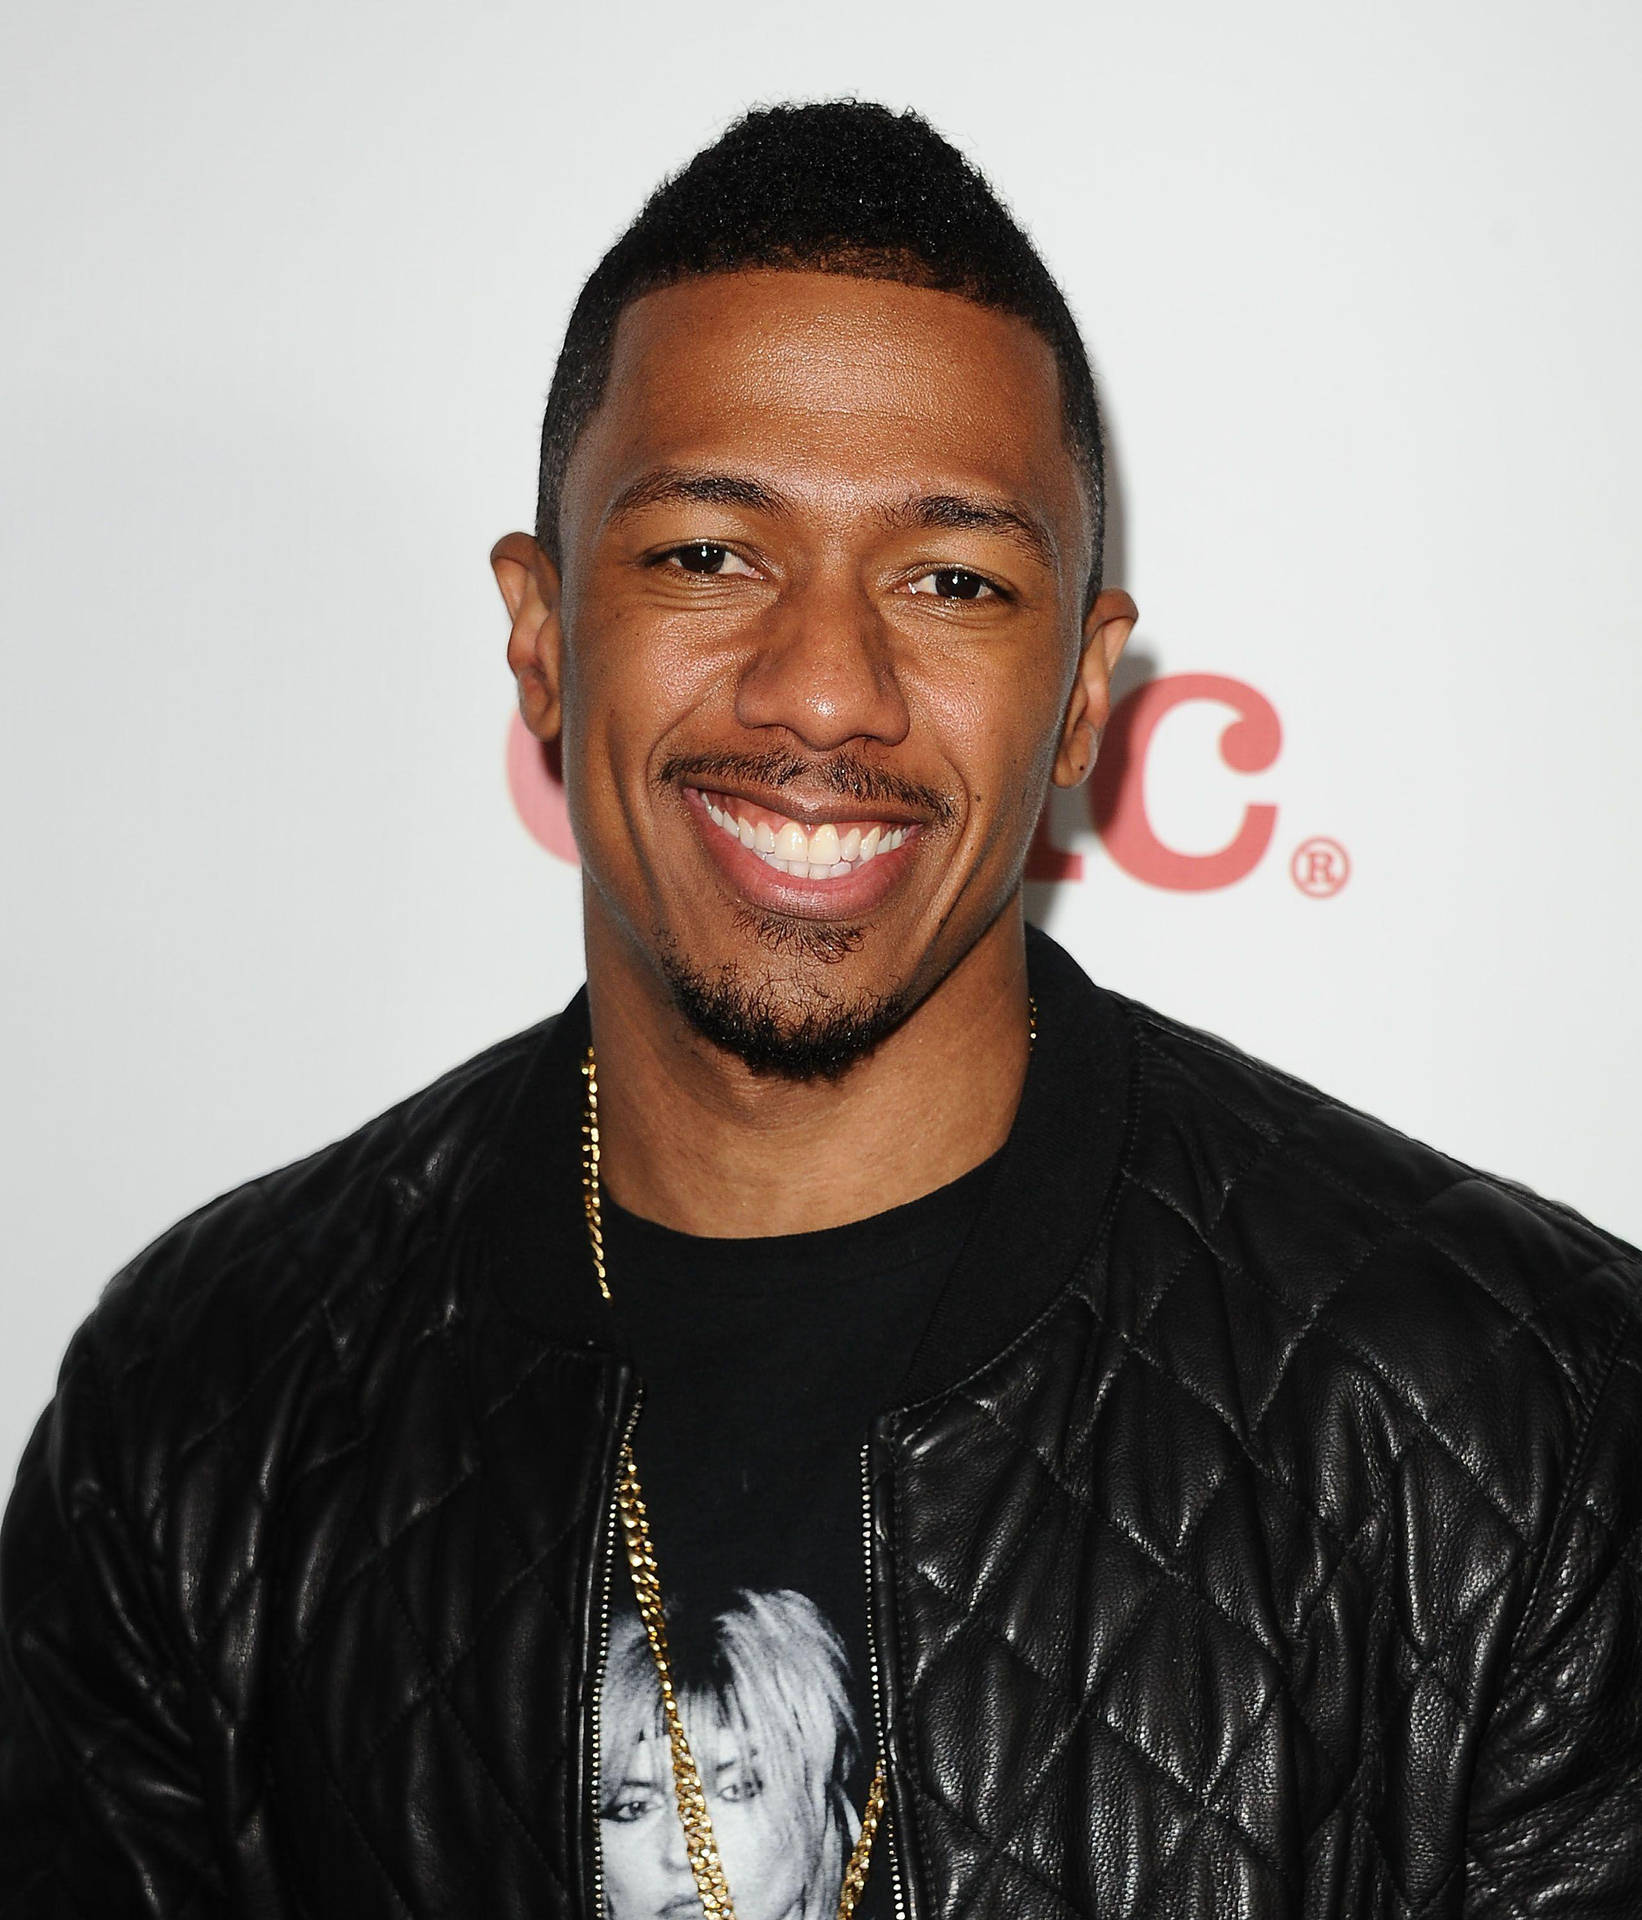 Nick Cannon Smiling At Camera Background